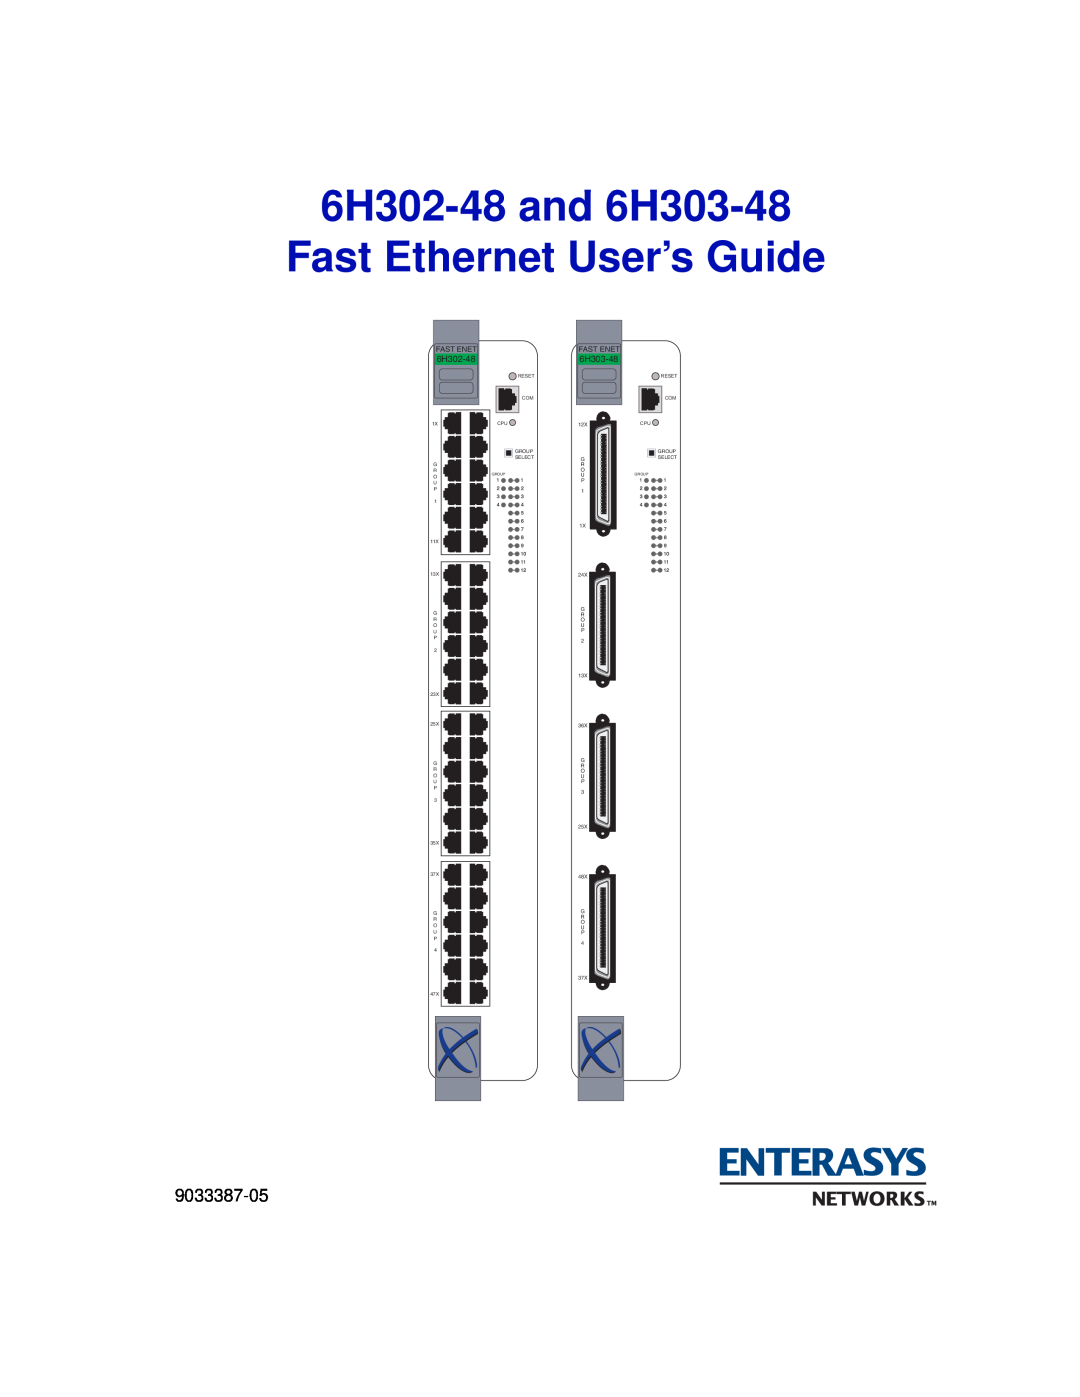 Enterasys Networks manual 6H302-48 and 6H303-48 Fast Ethernet User’s Guide, Fast Enet 